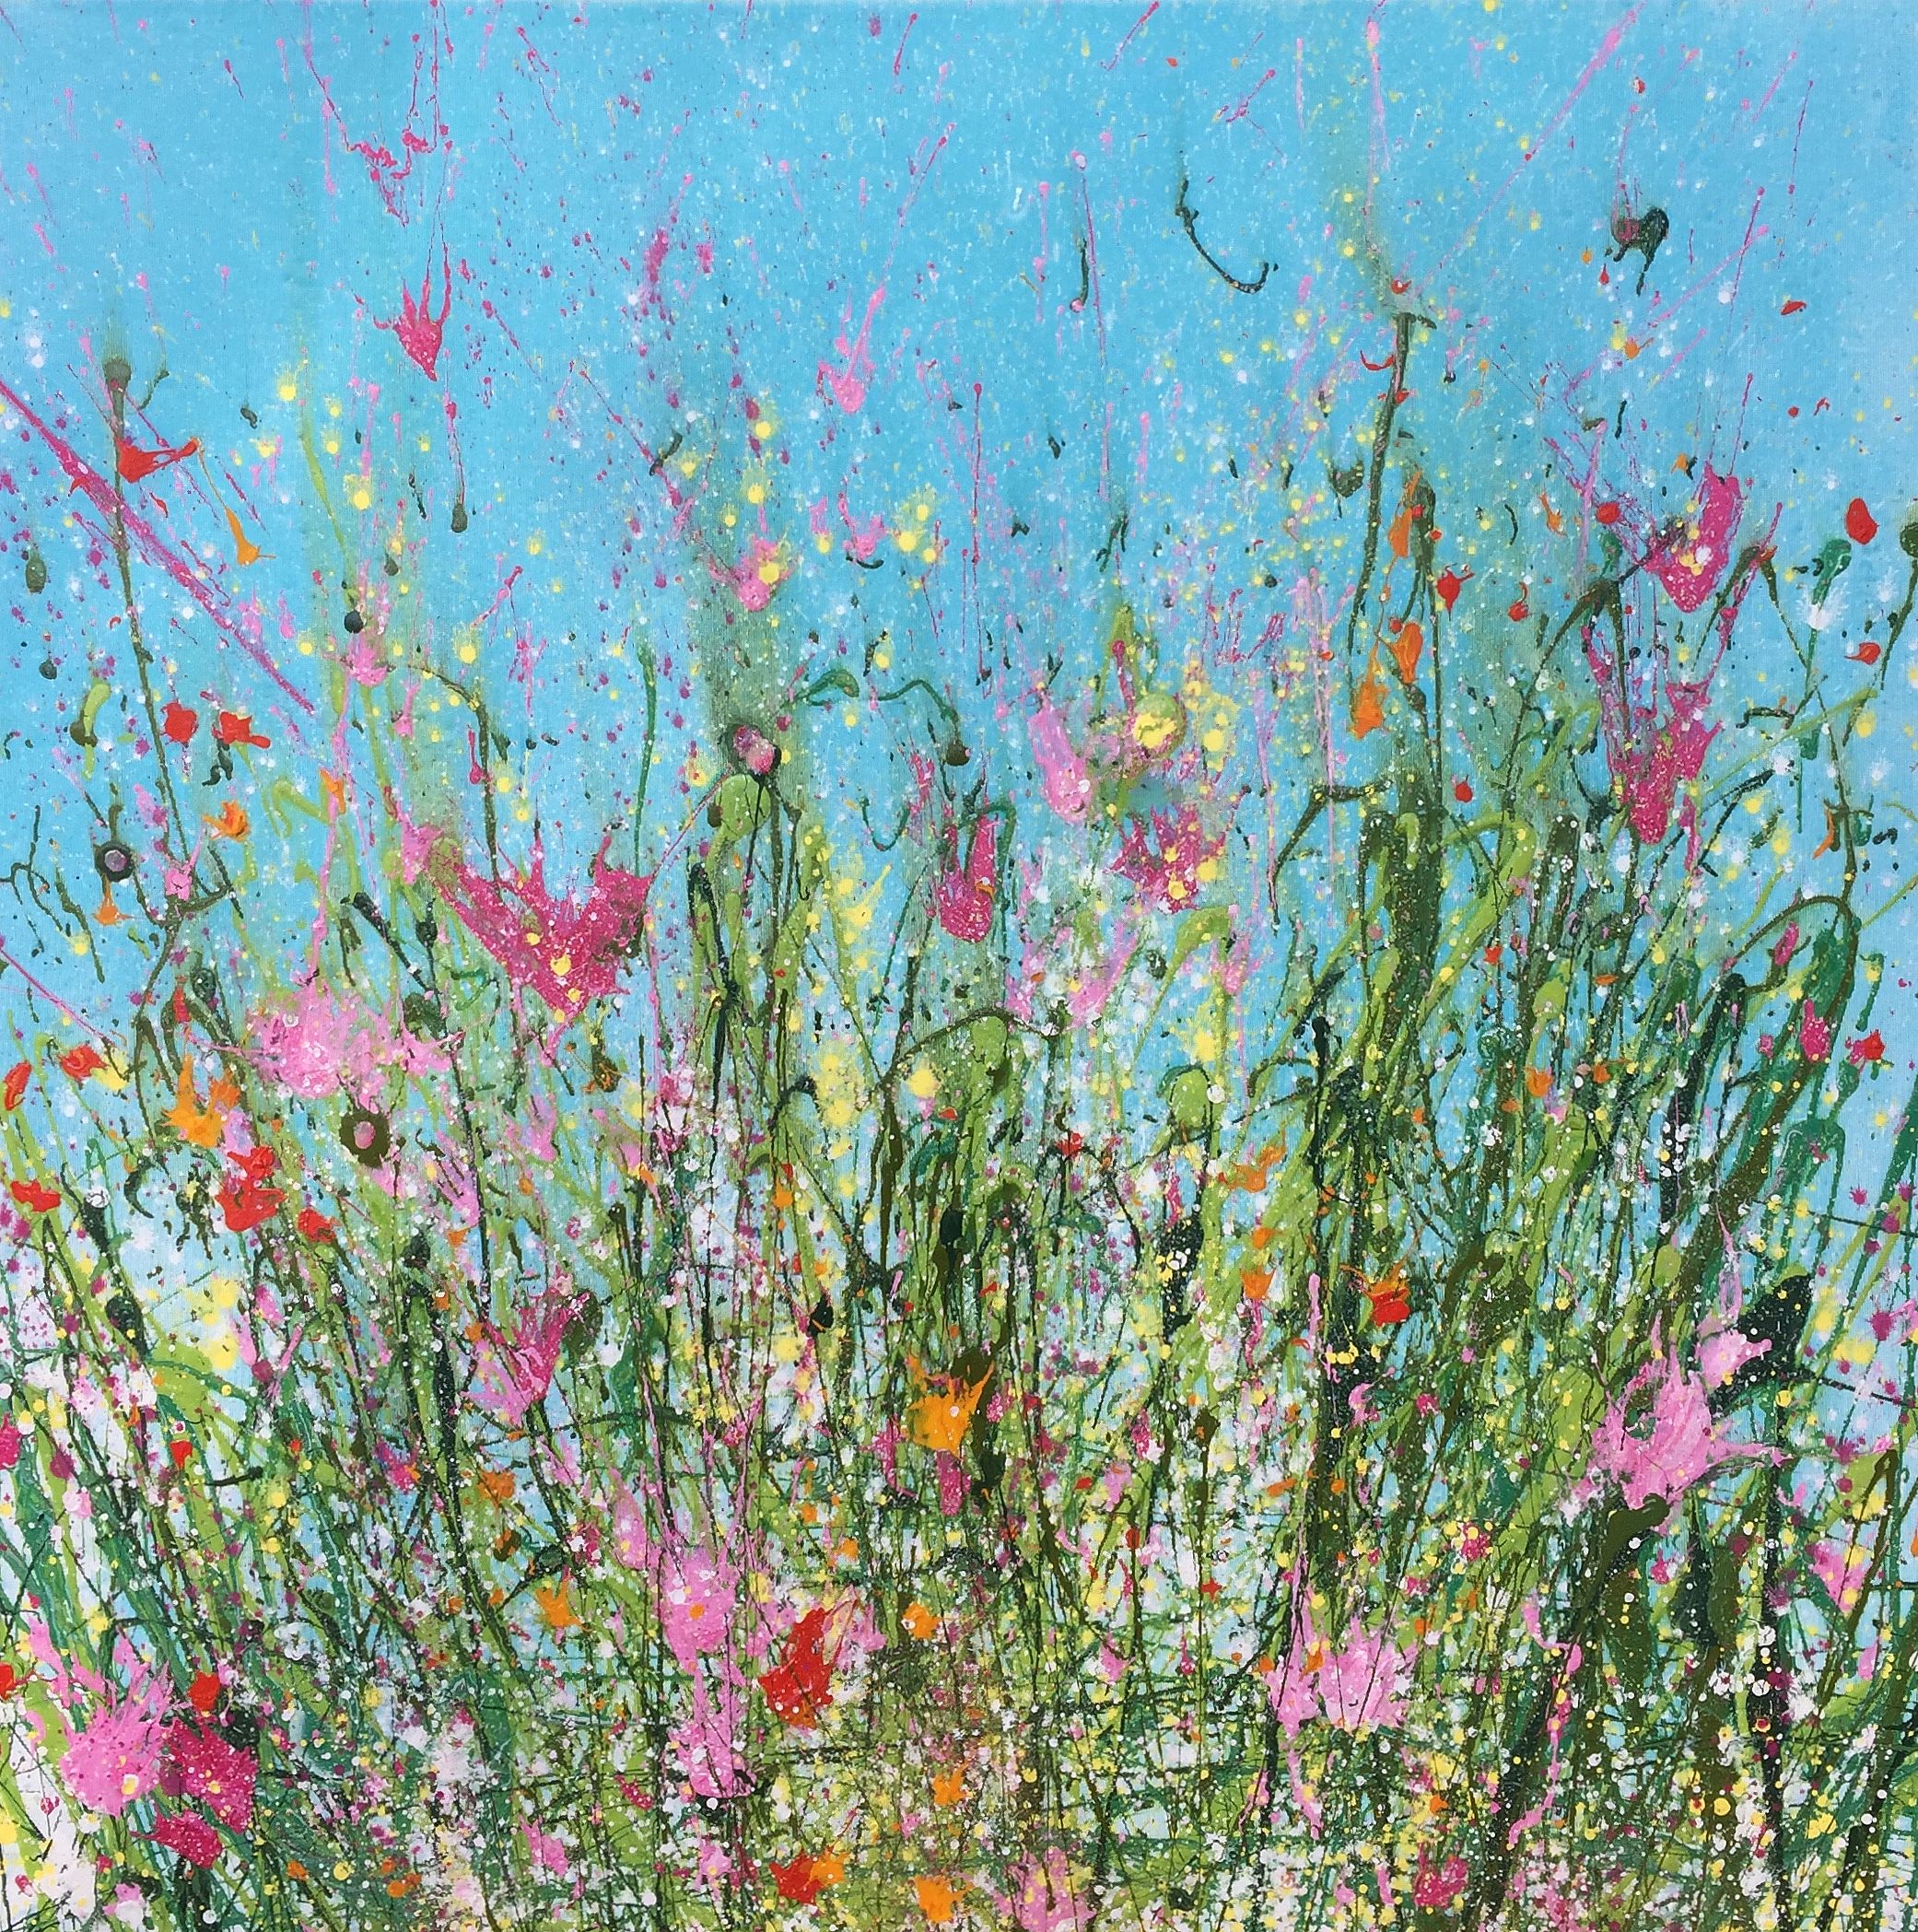 Into the Wild  by Yvonne Coomber